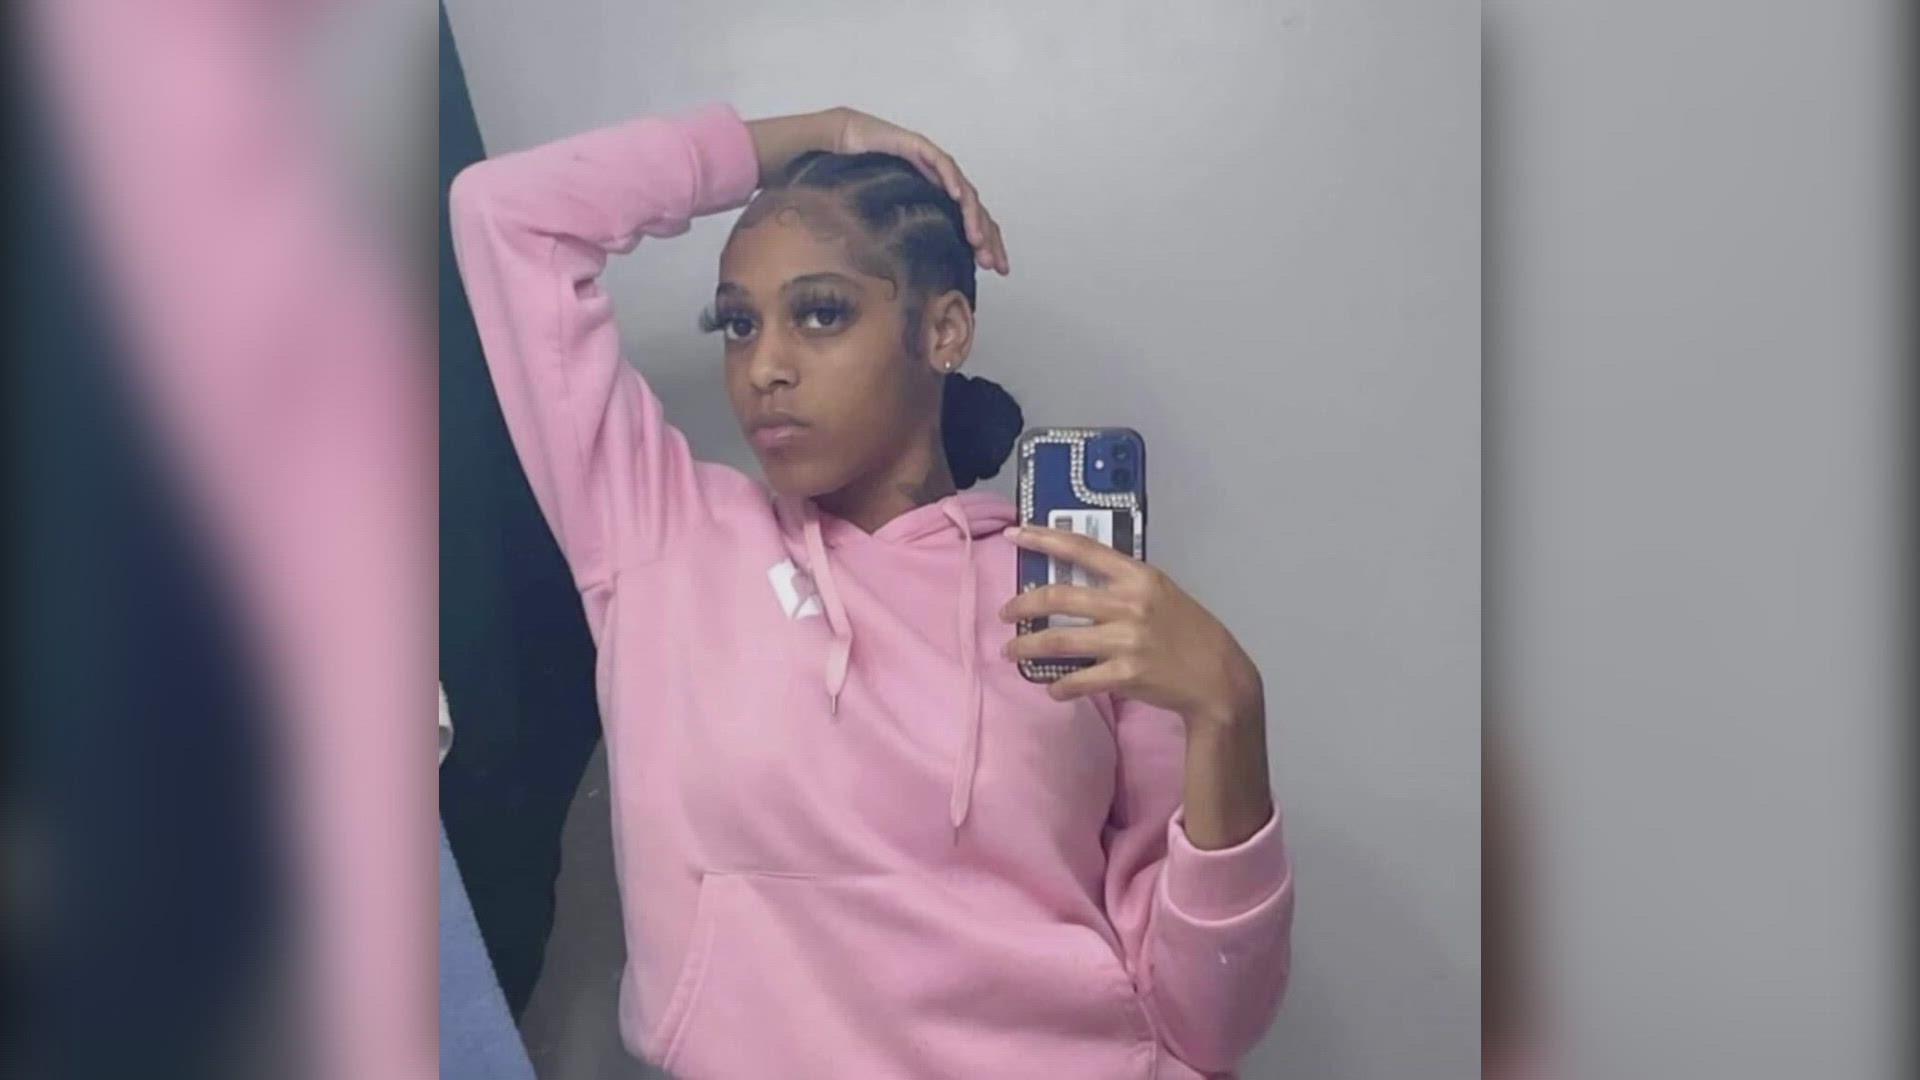 When Aniyah Womack was killed, her family called for anyone involved to turn themselves in. On Friday, JSO announced a manslaughter arrest family says is connected.